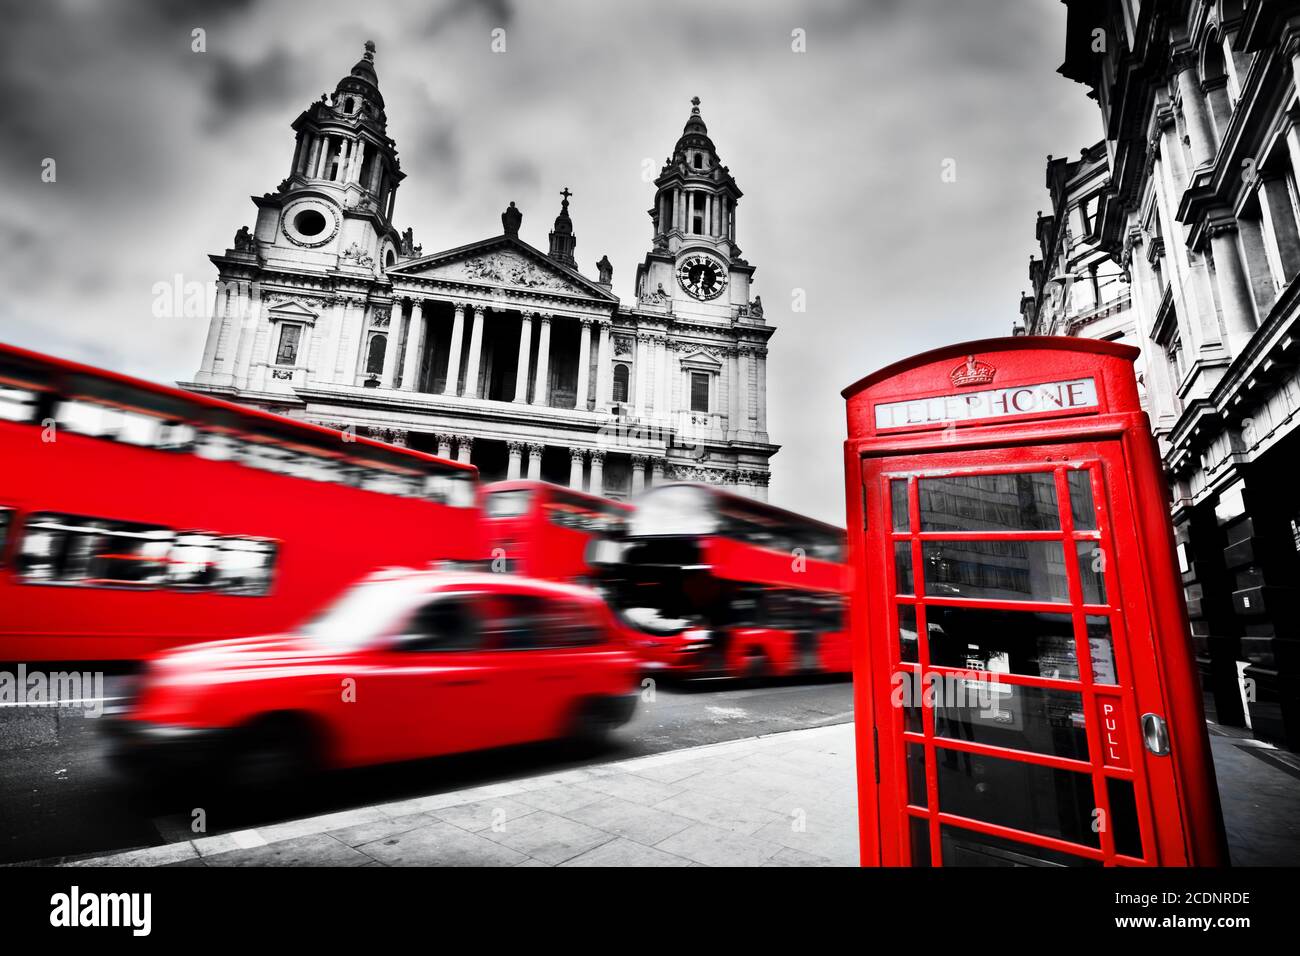 London, the UK. St Paul#39;s Cathedral, red bus, taxi cab and red telephone booth. Stock Photo